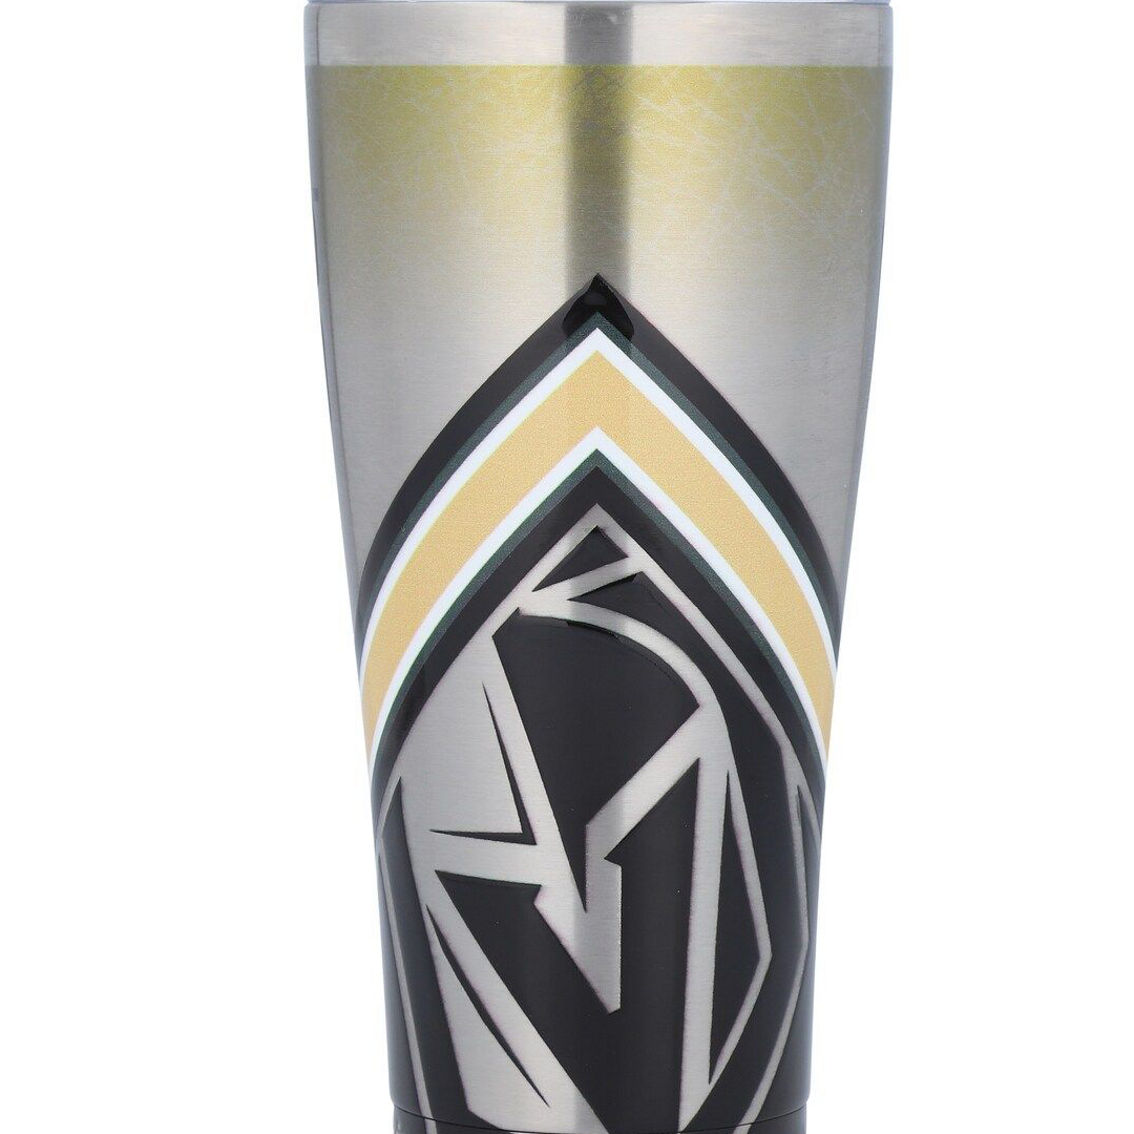 Tervis Vegas Golden Knights 30oz. Ice Stainless Steel Tumbler - Image 3 of 3